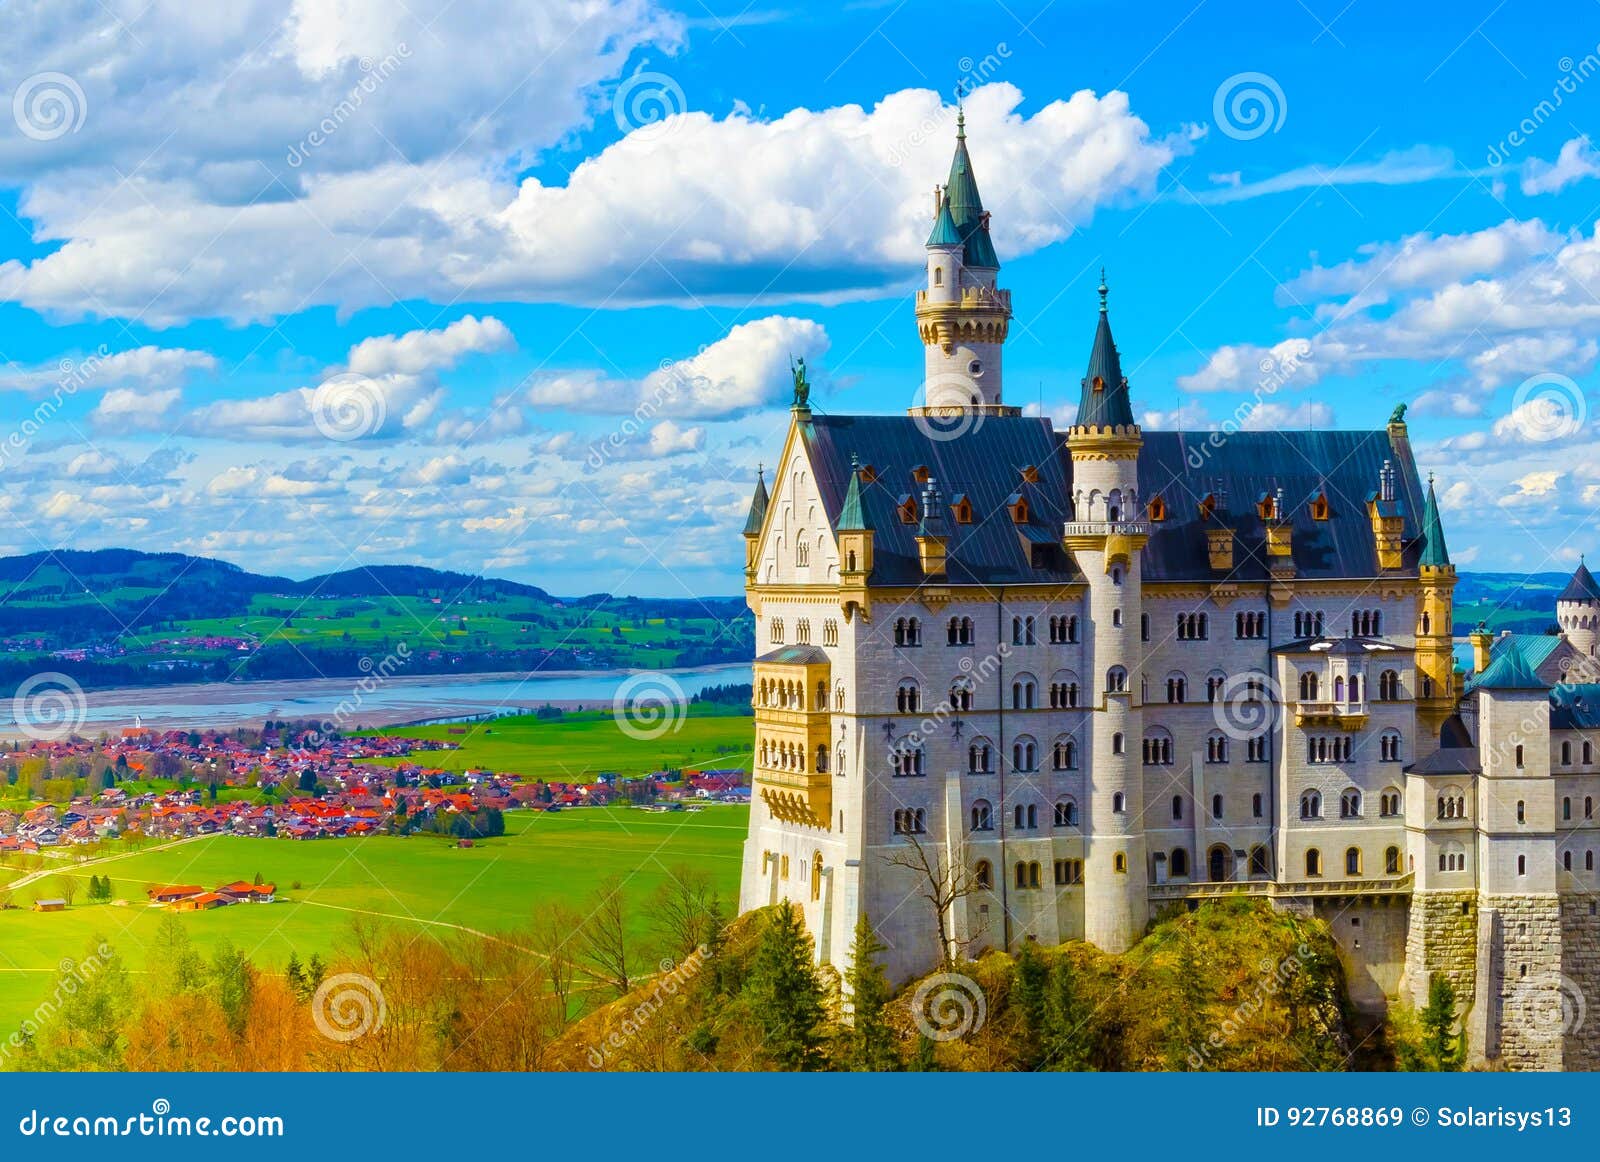 view of the famous tourist attraction in the bavarian alps - the 19th century neuschwanstein castle.